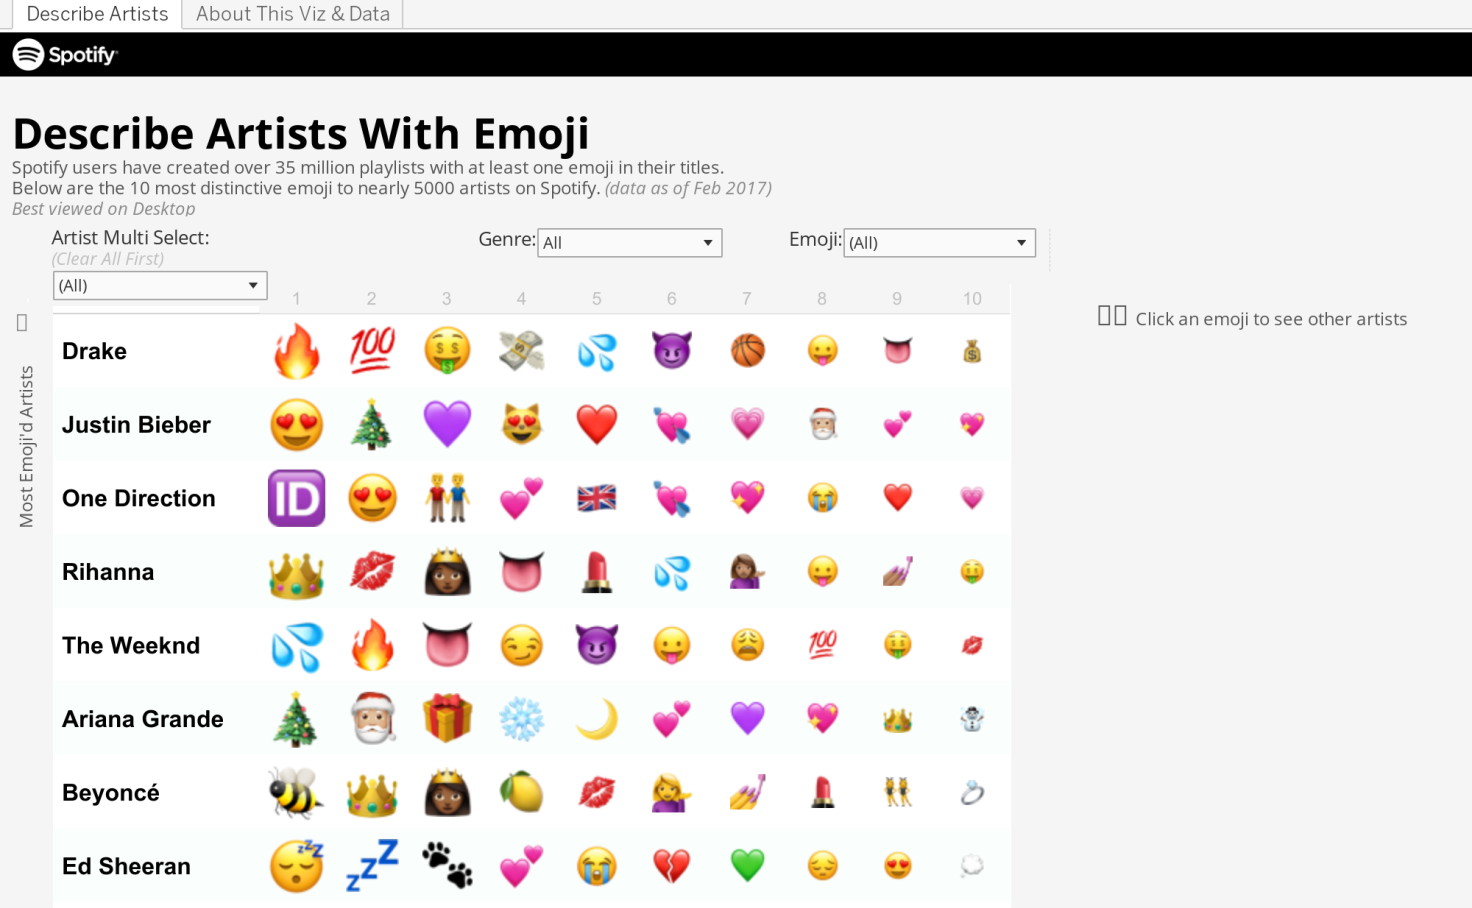 The Emoji Of Spotify Artists Spotify Insights Tableau Public Images, Photos, Reviews